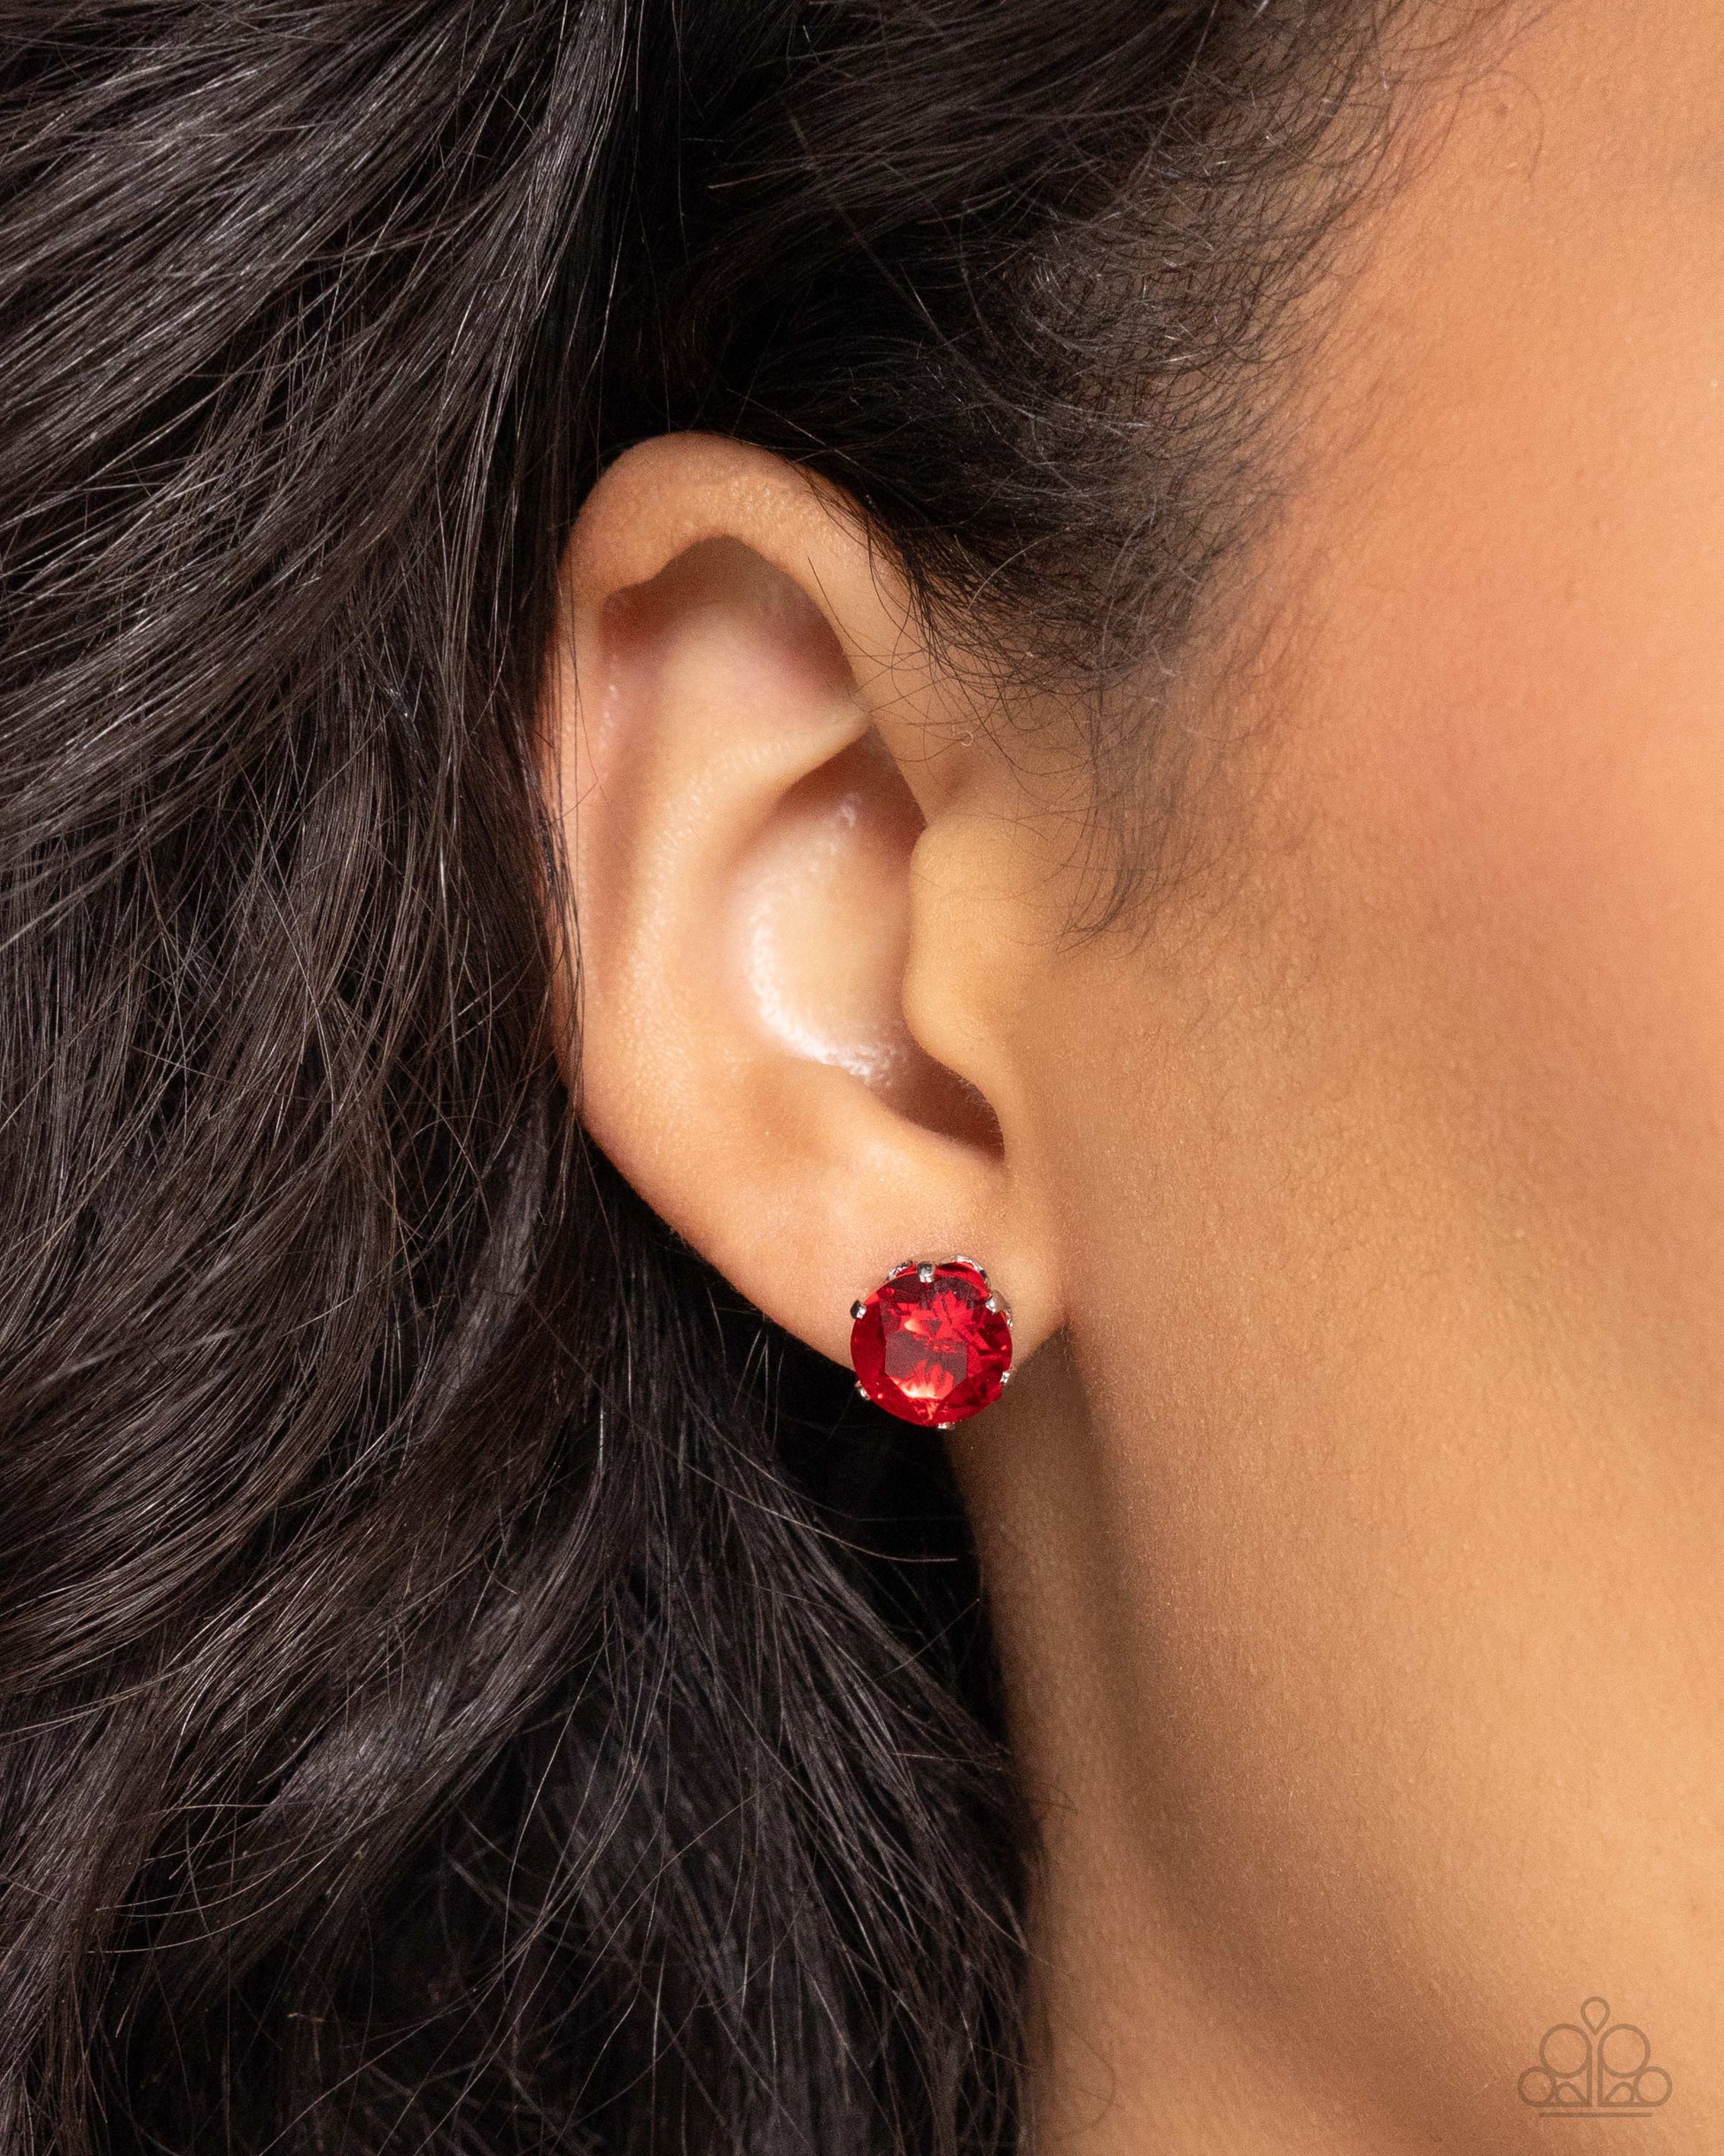 Breathtaking Birthstone Ruby Red Post Earring - Paparazzi Accessories  A sparkling ruby rhinestone is nestled inside a classic silver frame for a beautiful birthstone-inspired display. Earring attaches to a standard post fitting.  Sold as one pair of post earrings.  P5PO-RDXX-053UB